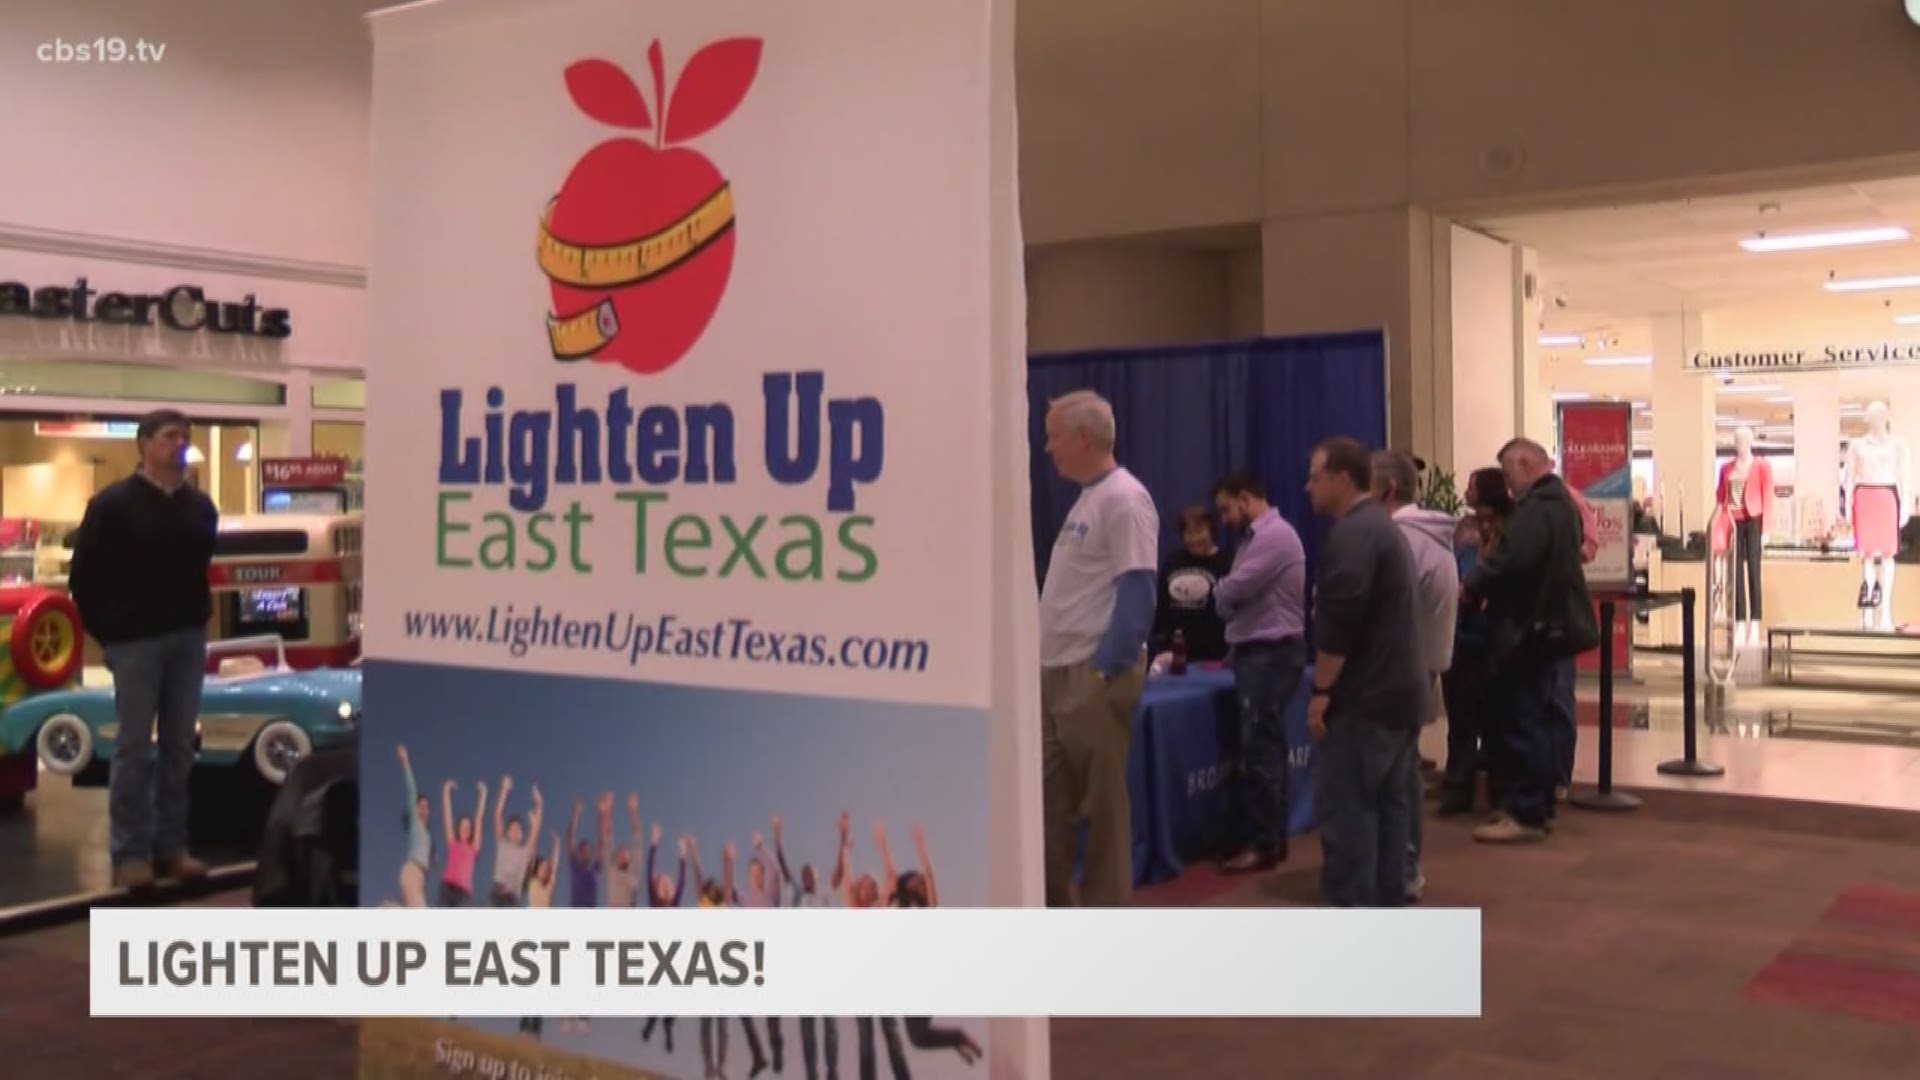 For seven years, Lighten Up East Texas has helped East Texans live healthier lifestyles. Their annual competition is kicking off now.